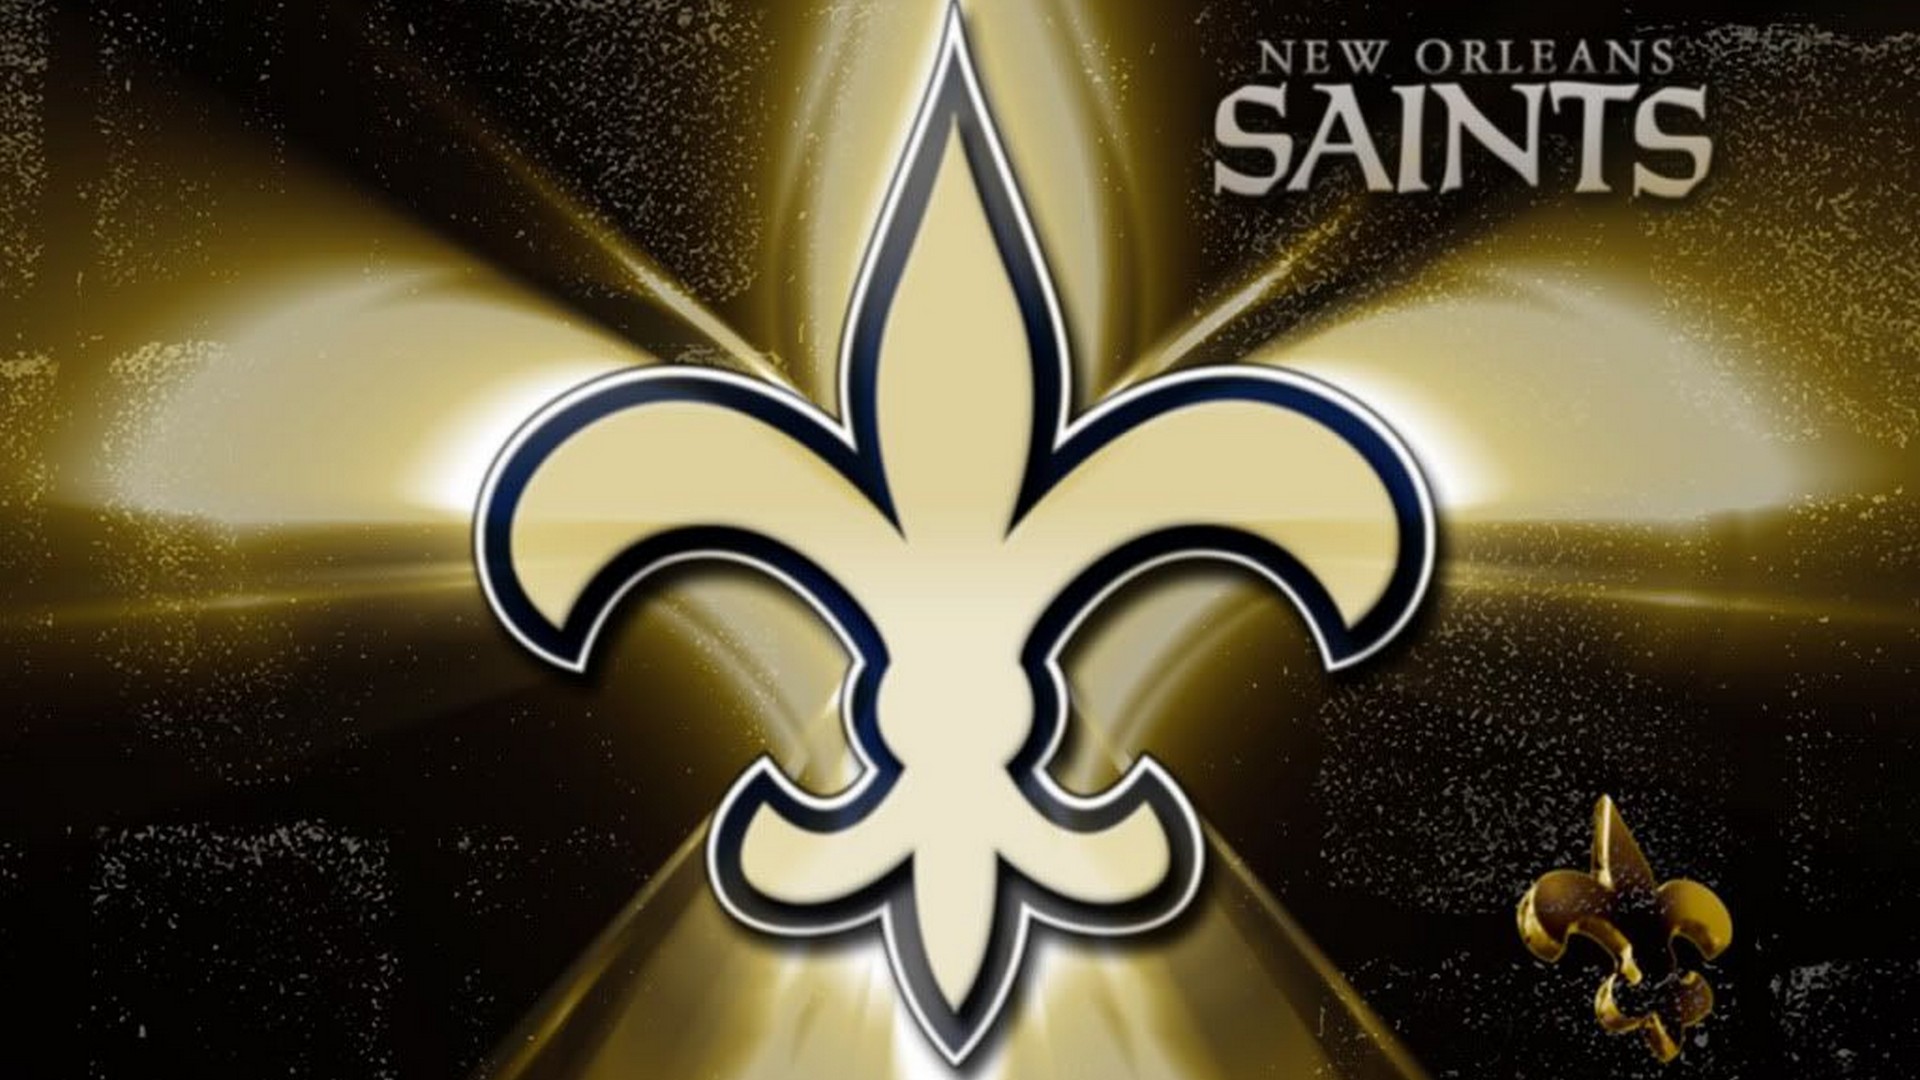 New Orleans Saints NFL For PC Wallpaper With Resolution 1920X1080 pixel. You can make this wallpaper for your Mac or Windows Desktop Background, iPhone, Android or Tablet and another Smartphone device for free